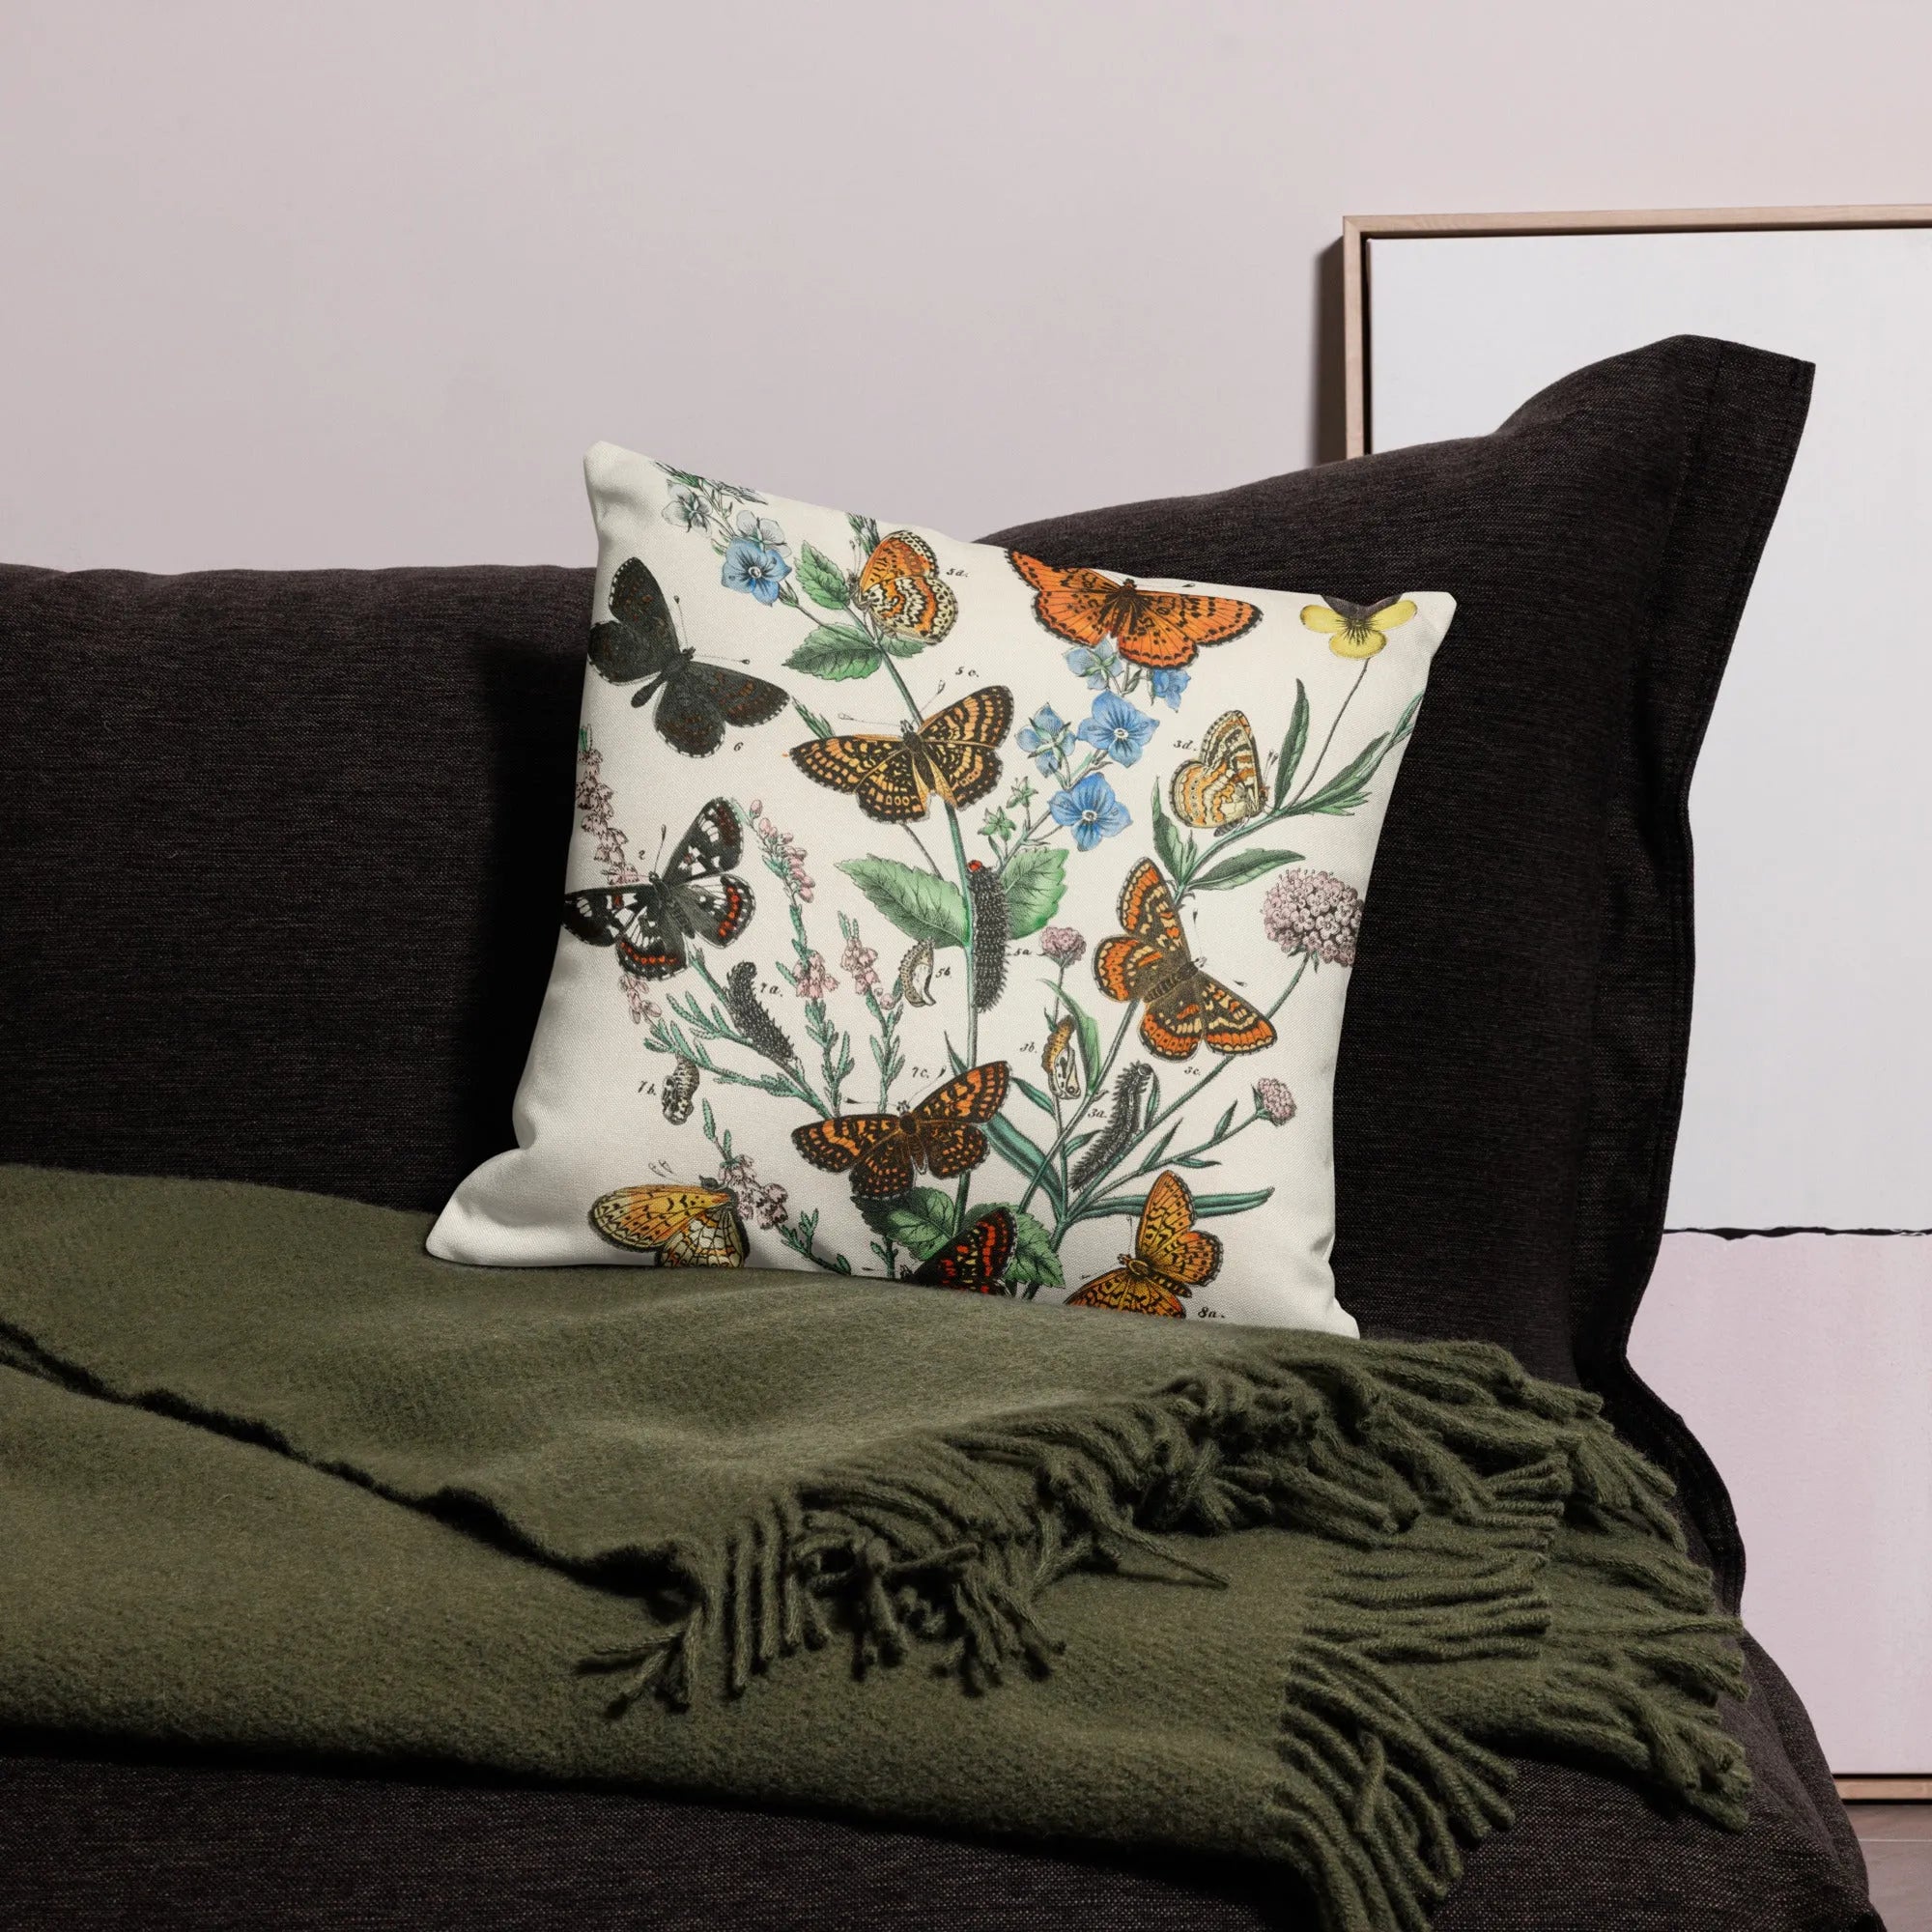 European Butterflies And Moths 2 By William Forsell Kirby Cushion - Throw Pillows - Aesthetic Art